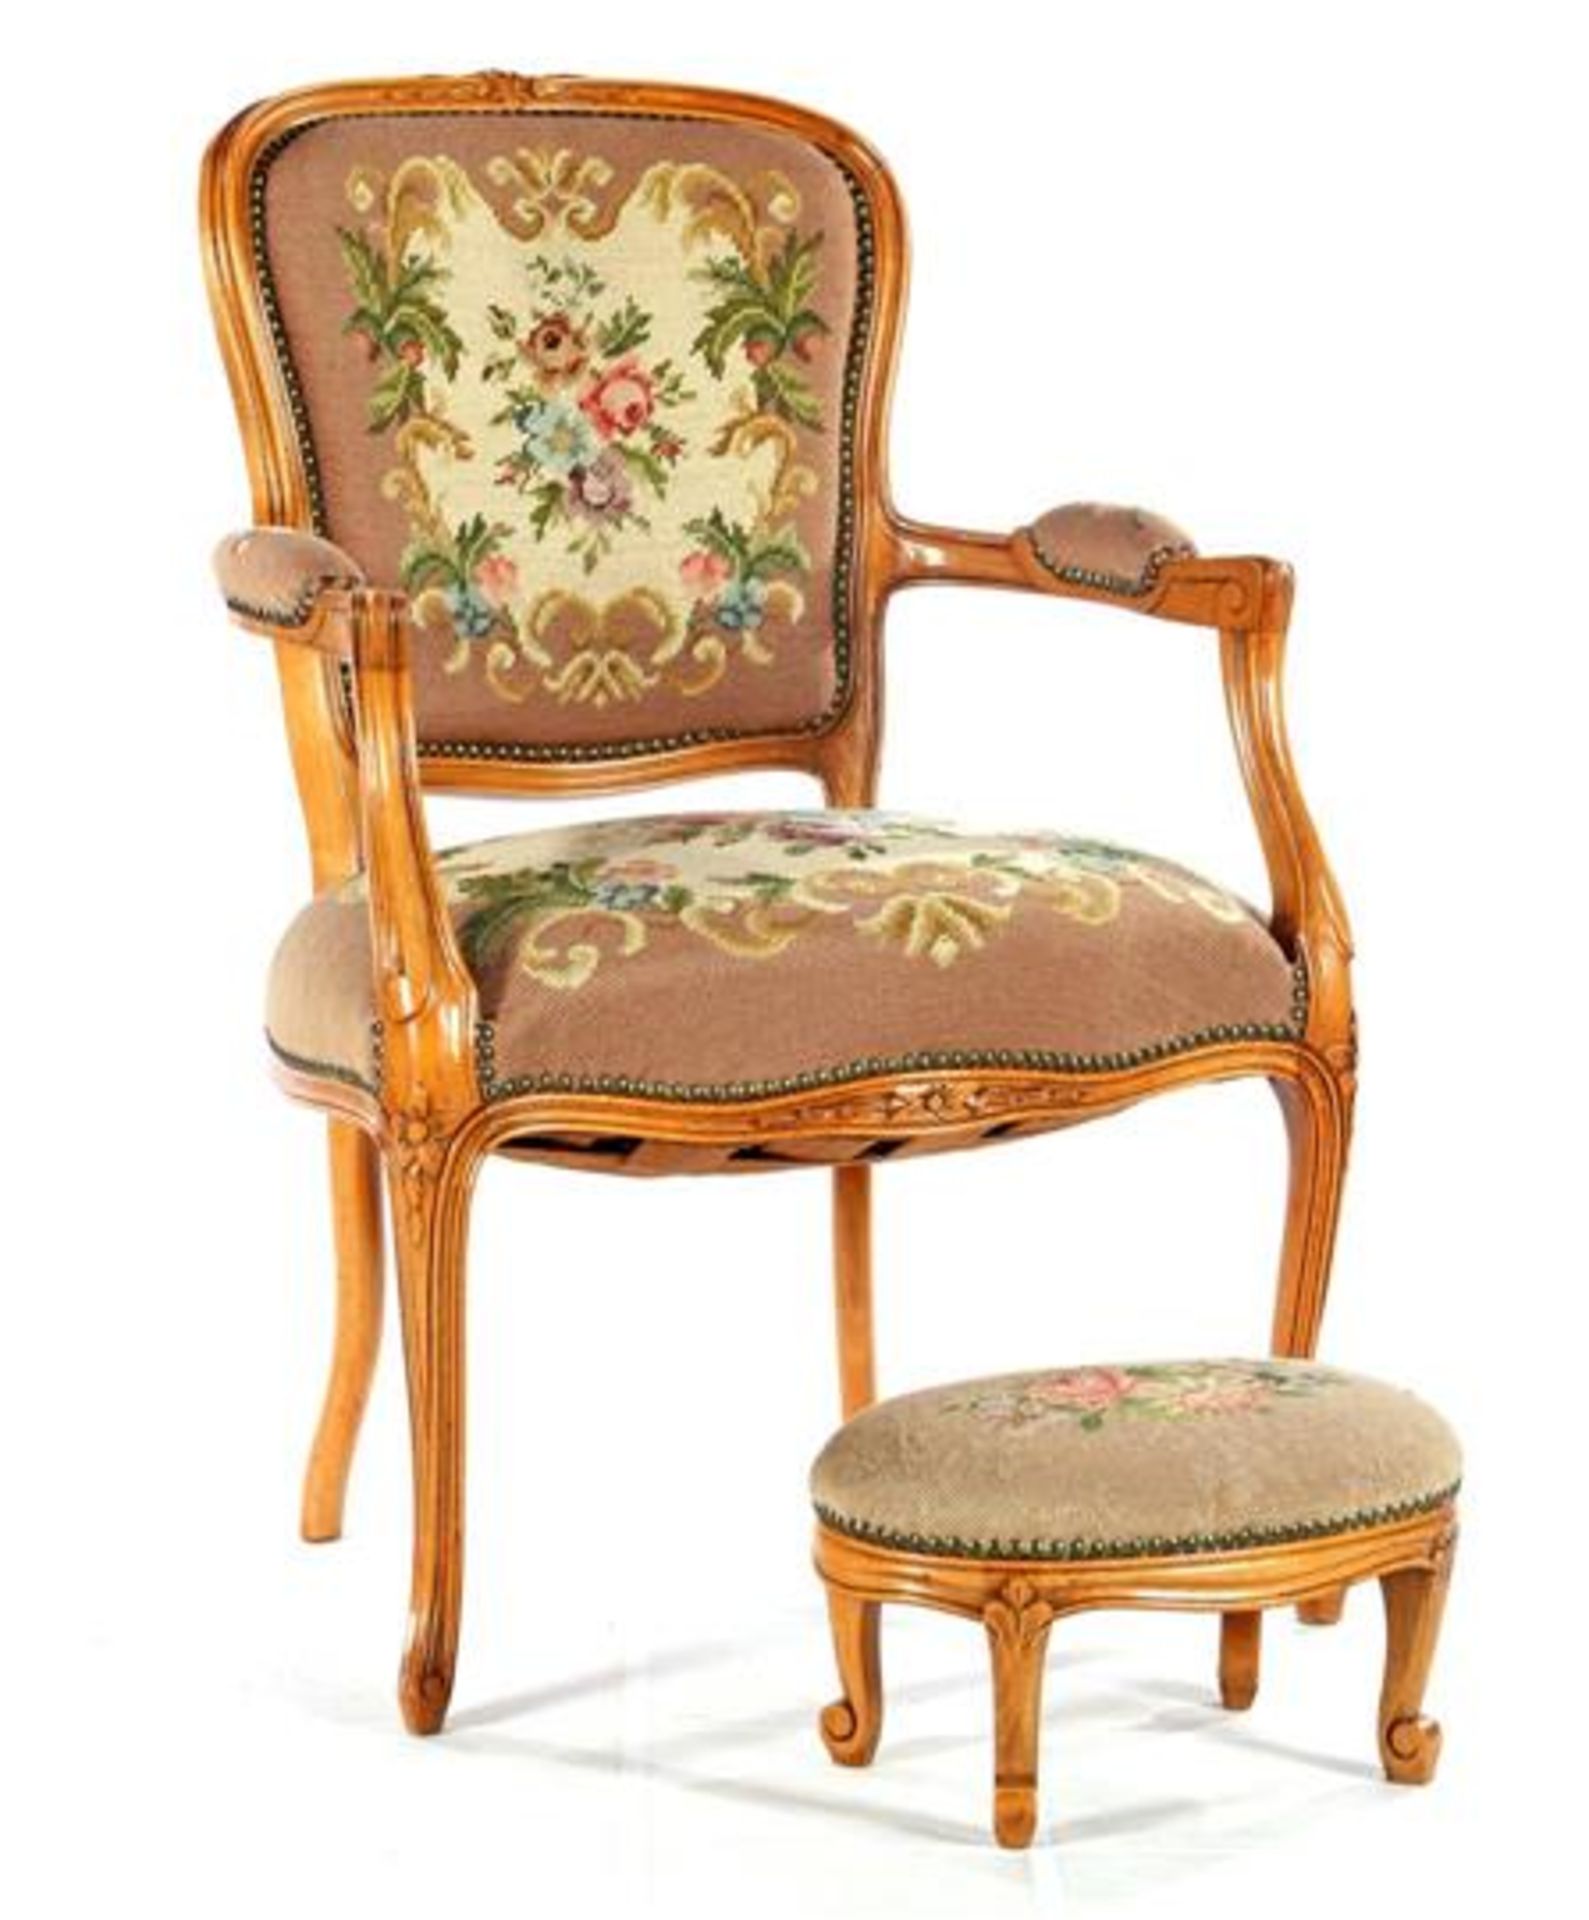 Walnut color classic armchair with embroidered upholstery with the same footstool